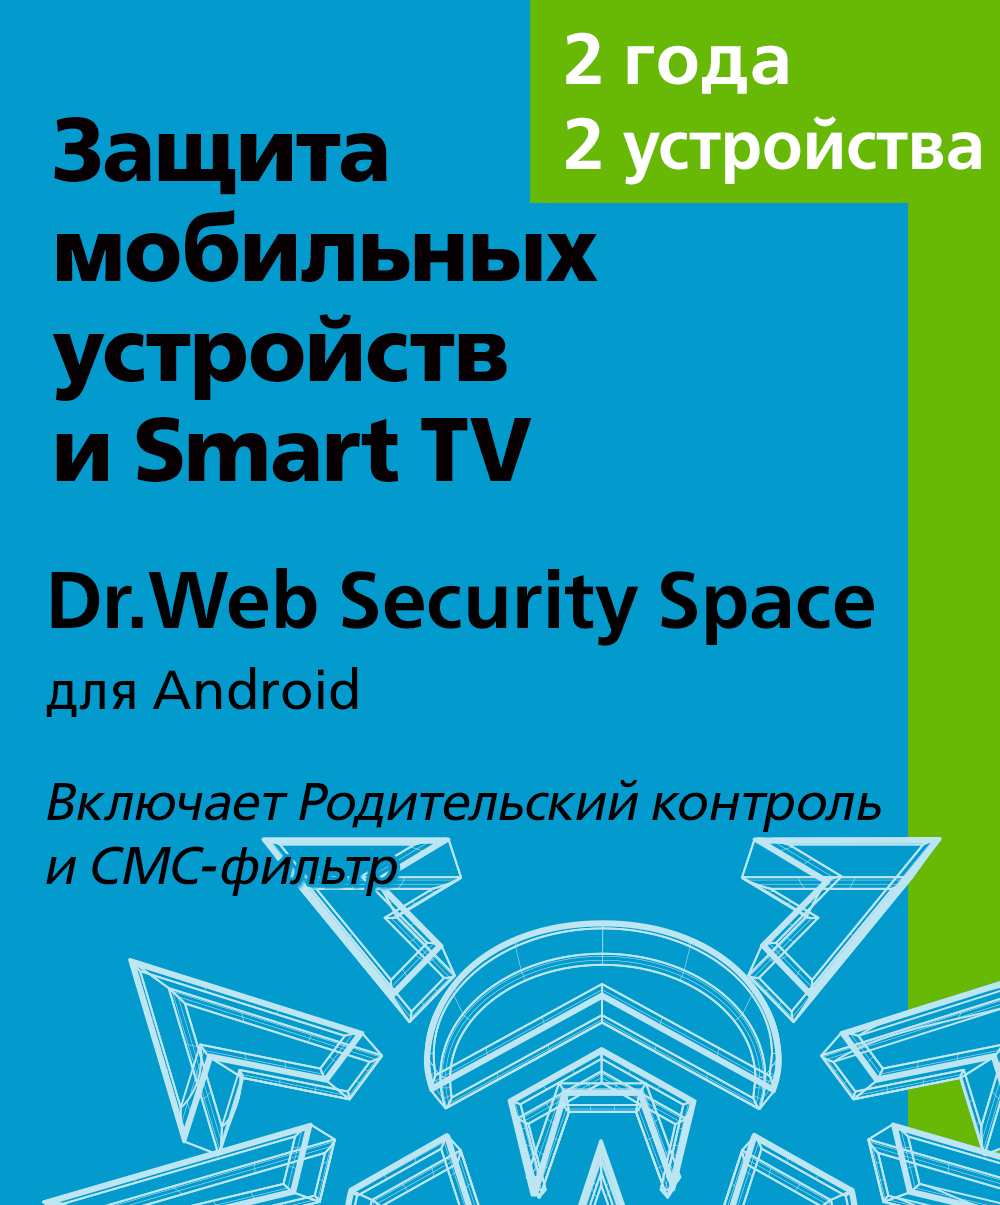 Dr.Web Security Space (  ) -  2 ,  24 ., 